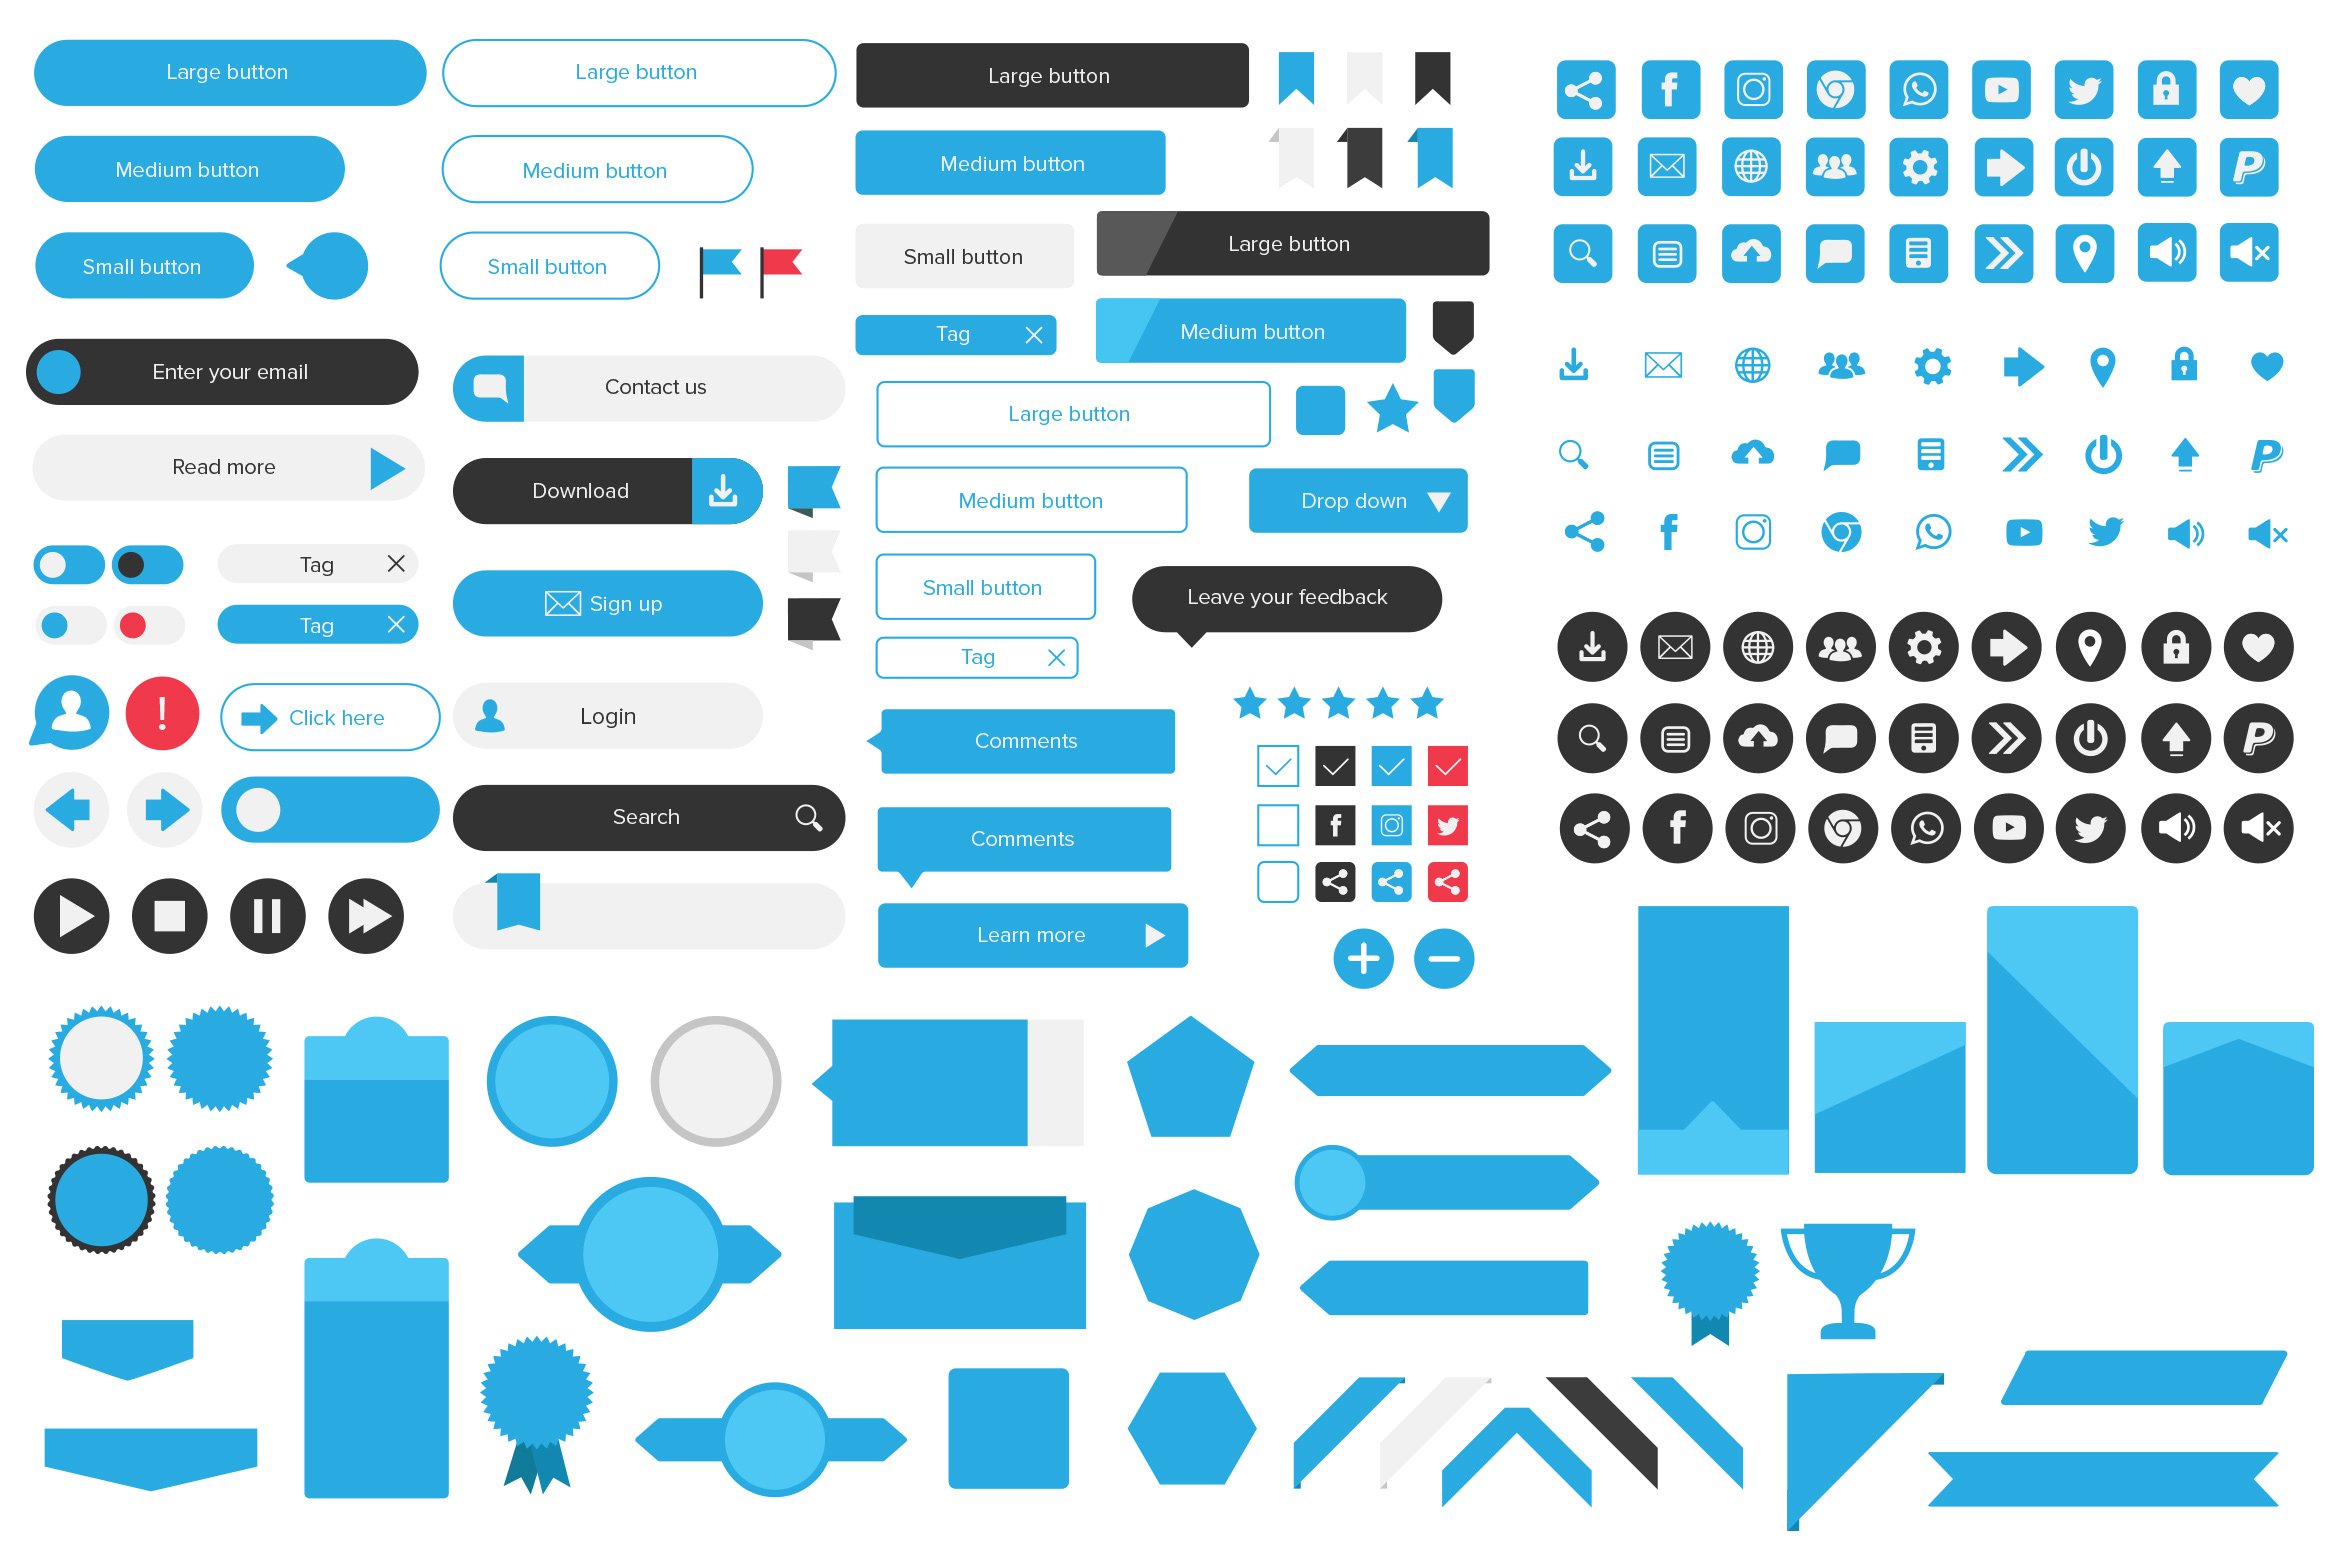 Buttons & Icons Clean Web UI Kit cover image.